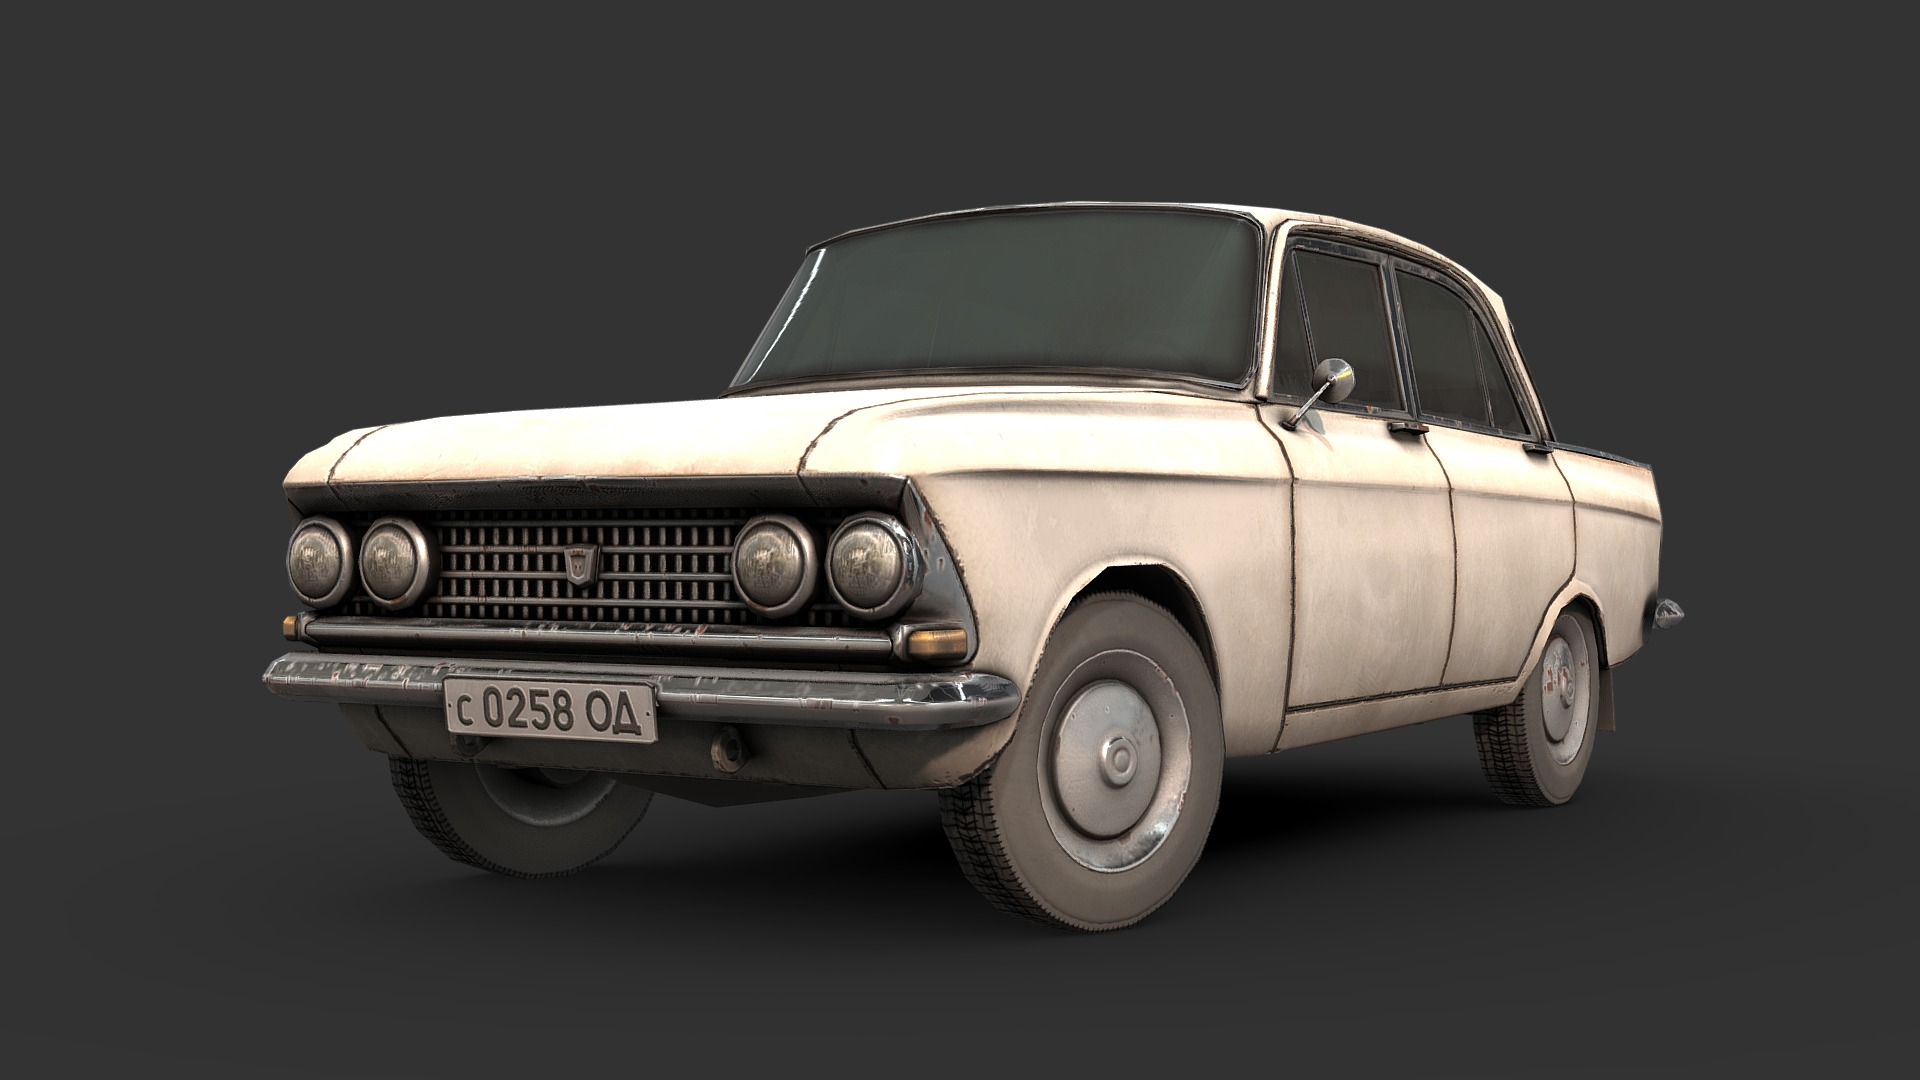 3D model Moskvich 408 - This is a 3D model of the Moskvich 408. The 3D model is about a car parked on a white background.